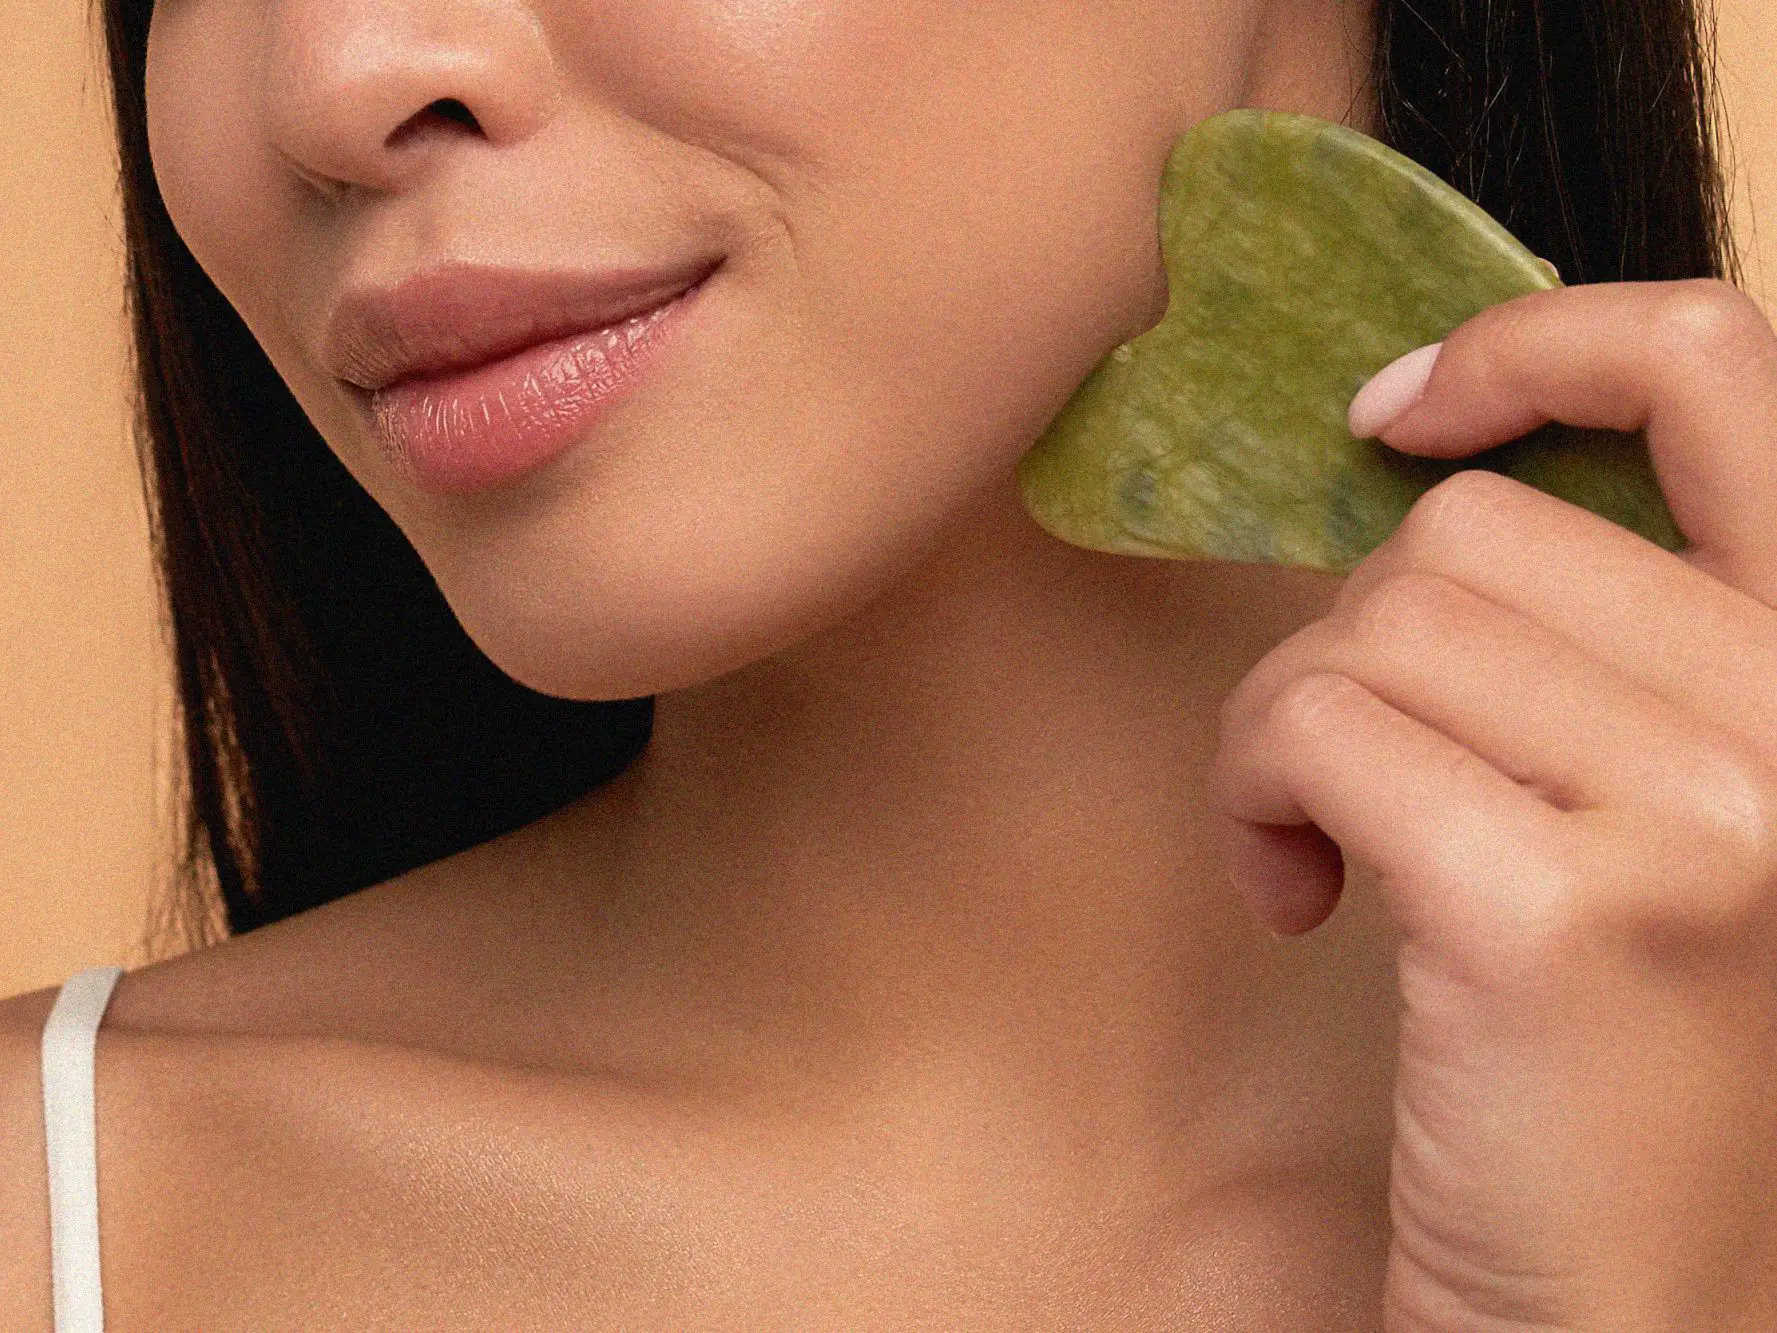 woman using an aloe vera treatment on her double chin